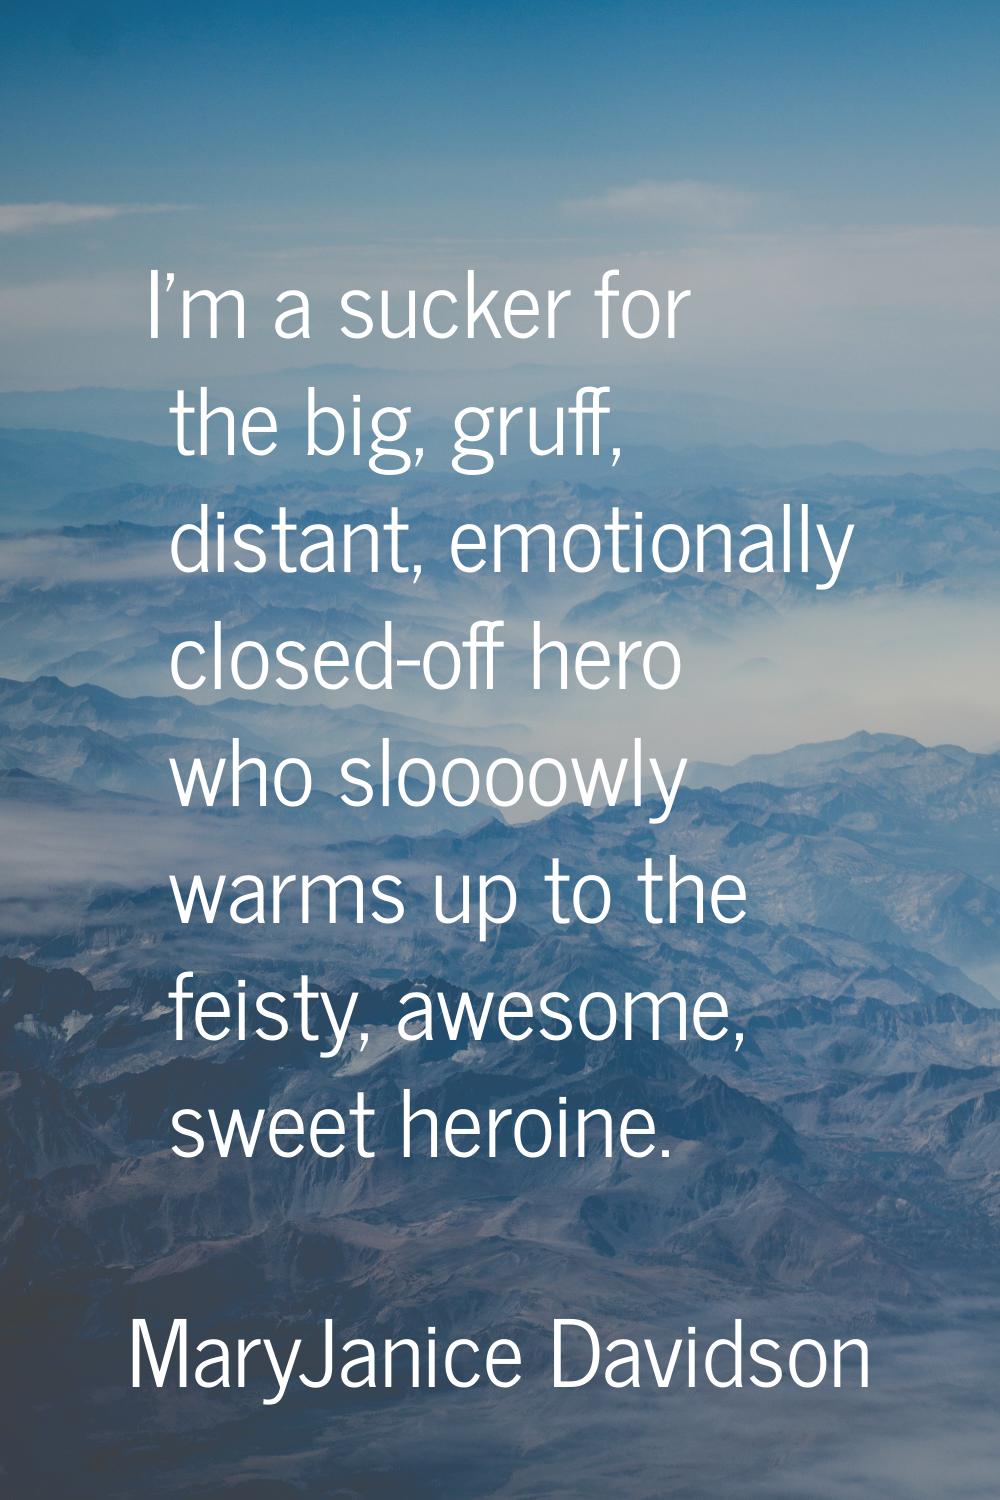 I'm a sucker for the big, gruff, distant, emotionally closed-off hero who sloooowly warms up to the